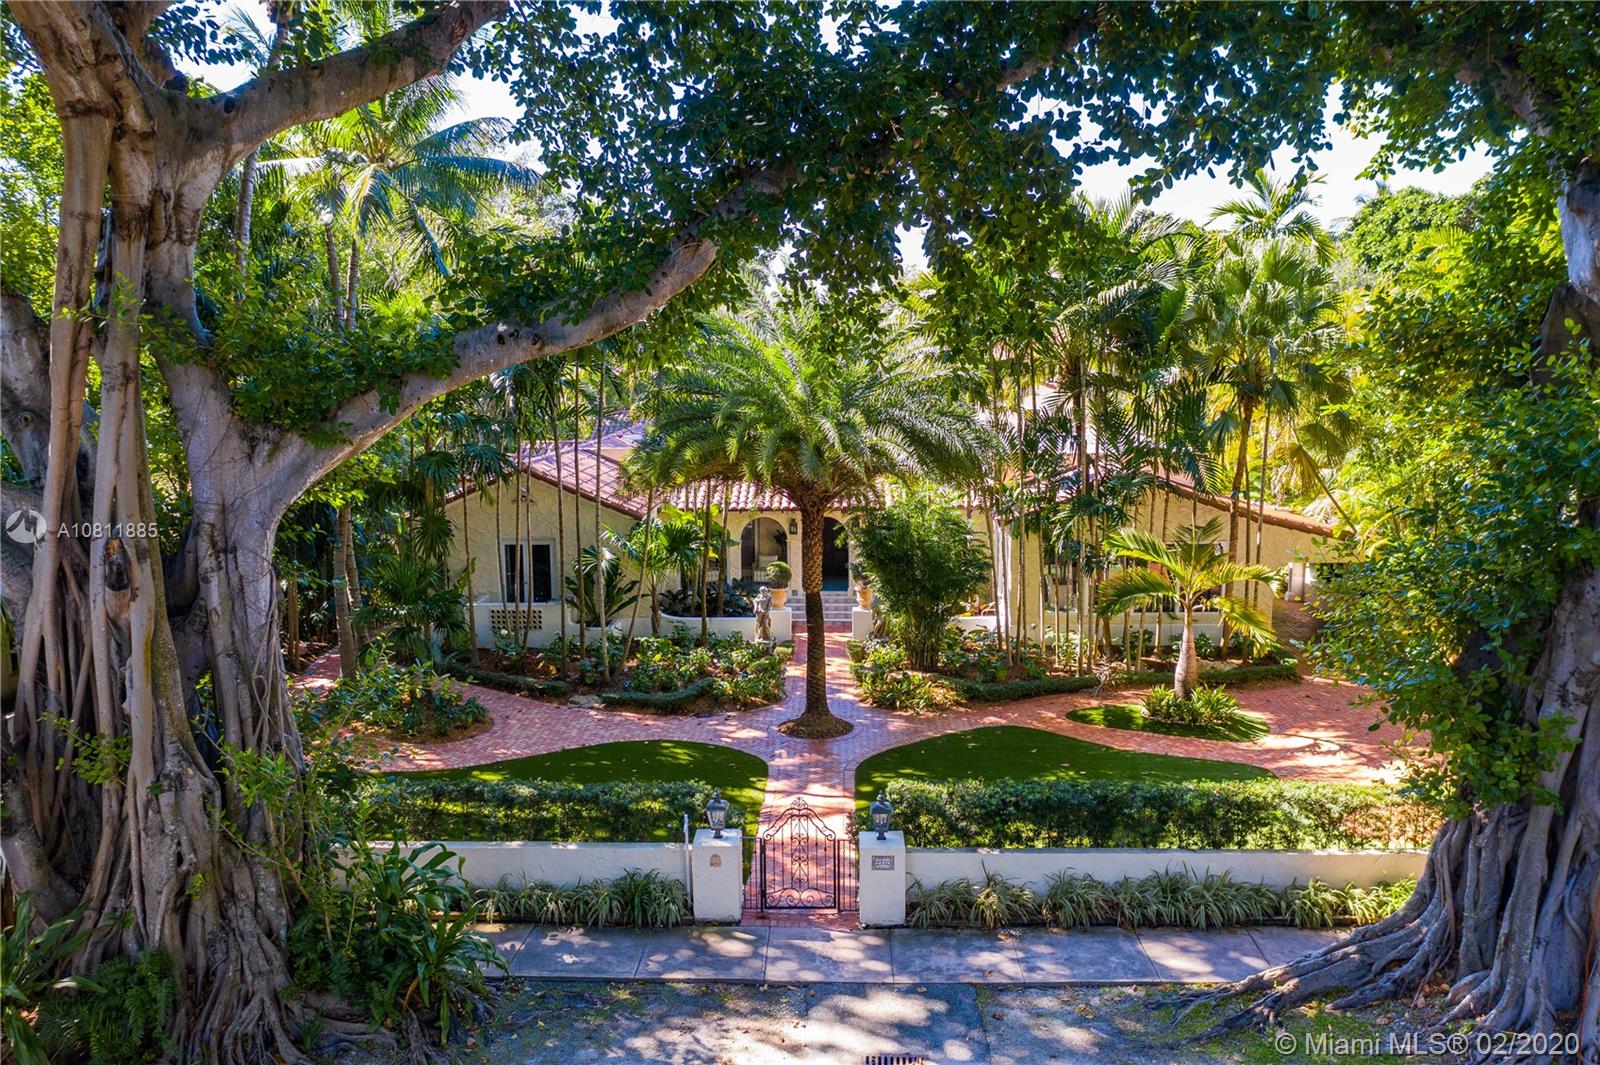 Aerial view of the home framed by banyan trees